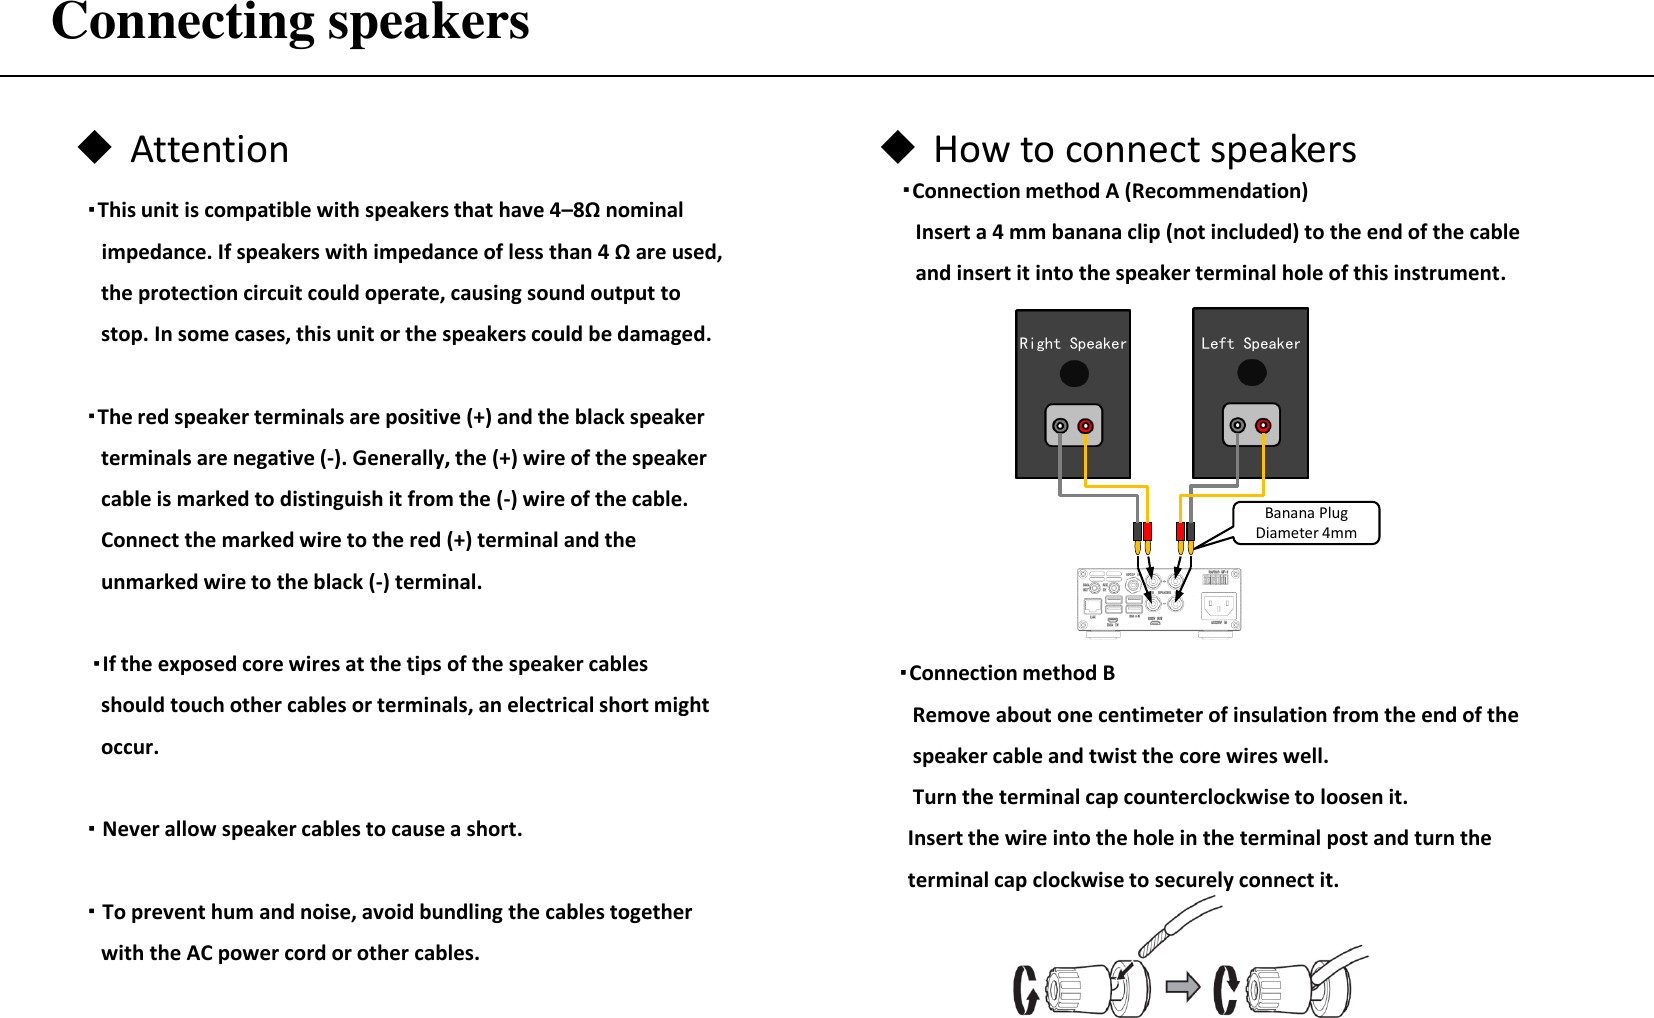 Connecting speakers ・Connection method A (Recommendation)  Insert a 4 mm banana clip (not included) to the end of the cable    and insert it into the speaker terminal hole of this instrument. Attention  How to connect speakers ・This unit is compatible with speakers that have 4–8Ω nominal    impedance. If speakers with impedance of less than 4 Ω are used,    the protection circuit could operate, causing sound output to    stop. In some cases, this unit or the speakers could be damaged.  ・The red speaker terminals are positive (+) and the black speaker       terminals are negative (-). Generally, the (+) wire of the speaker       cable is marked to distinguish it from the (-) wire of the cable.      Connect the marked wire to the red (+) terminal and the     unmarked wire to the black (-) terminal.   ・If the exposed core wires at the tips of the speaker cables      should touch other cables or terminals, an electrical short might     occur.  ・ Never allow speaker cables to cause a short.  ・ To prevent hum and noise, avoid bundling the cables together    with the AC power cord or other cables. ・Connection method B  Remove about one centimeter of insulation from the end of the       speaker cable and twist the core wires well.    Turn the terminal cap counterclockwise to loosen it.   Insert the wire into the hole in the terminal post and turn the    terminal cap clockwise to securely connect it. Banana Plug Diameter 4mm Left Speaker Right Speaker 